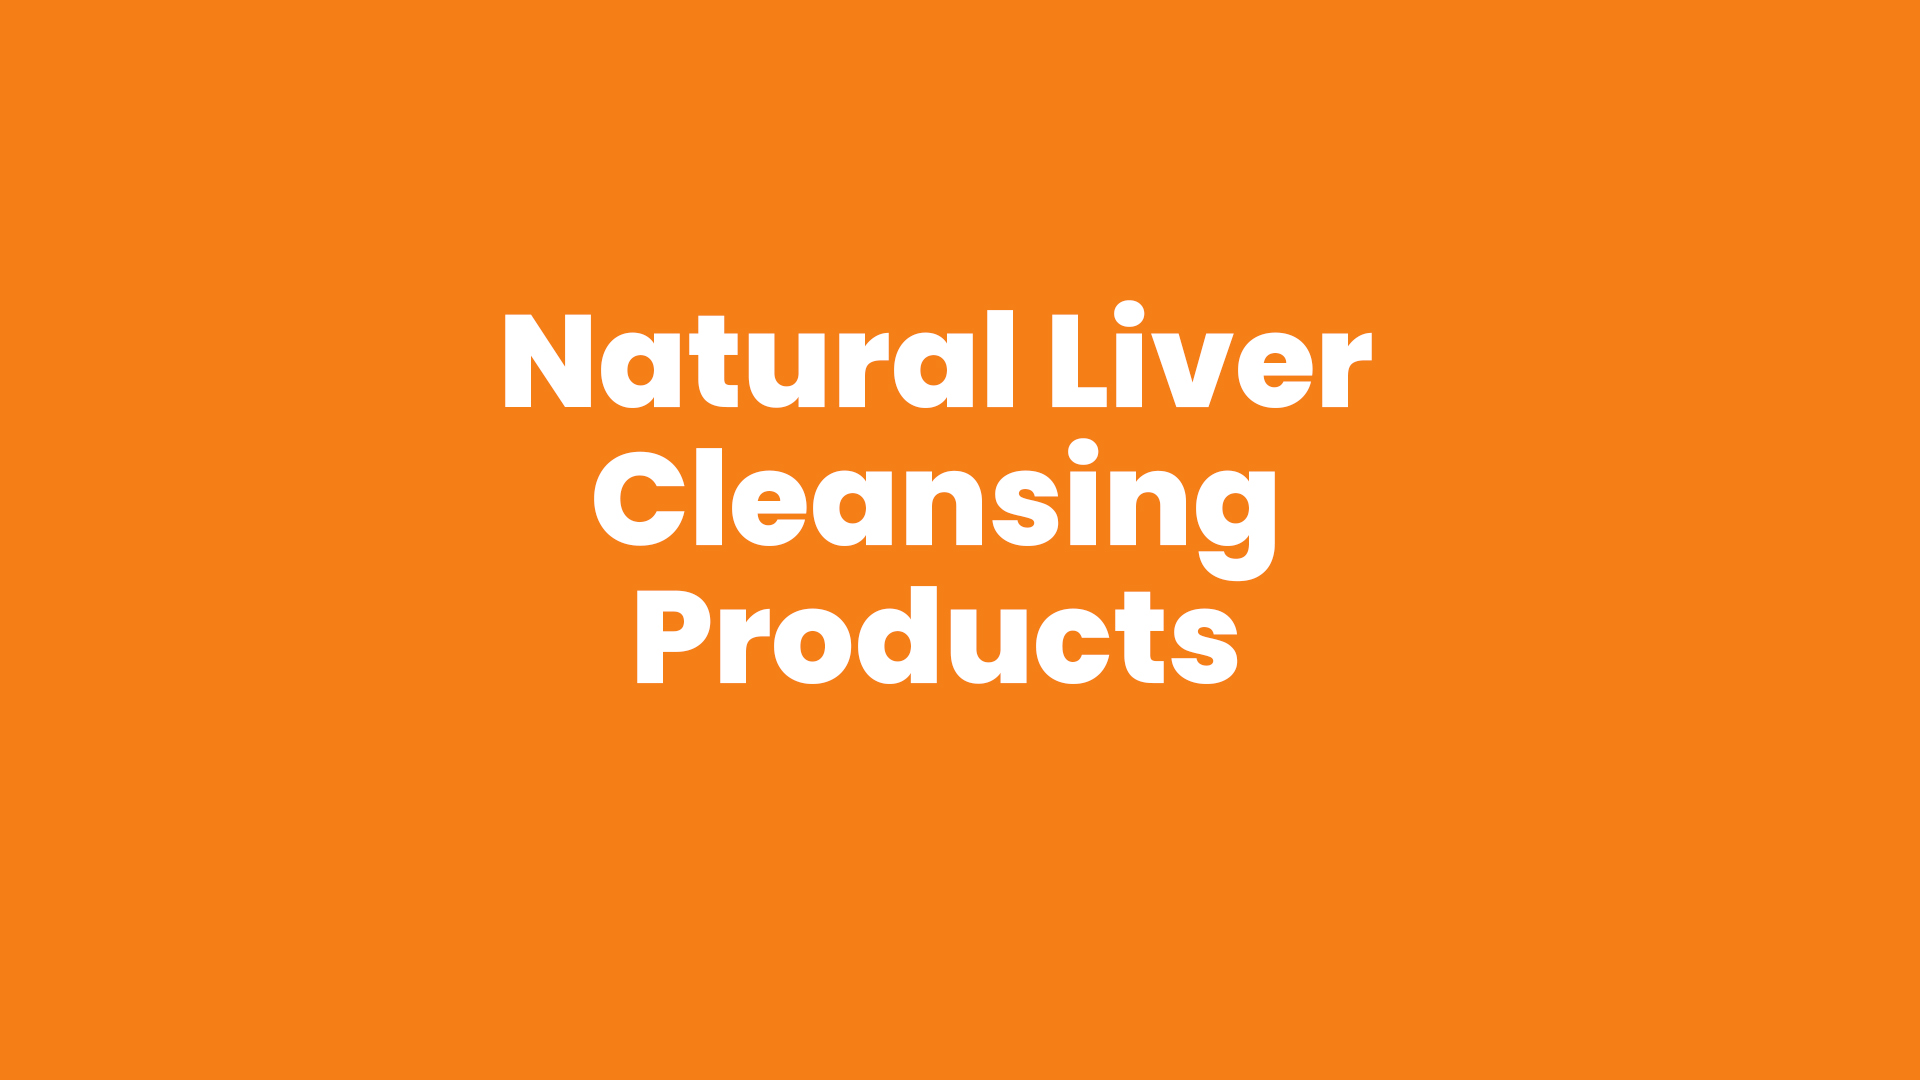 Natural Liver Cleansing Products